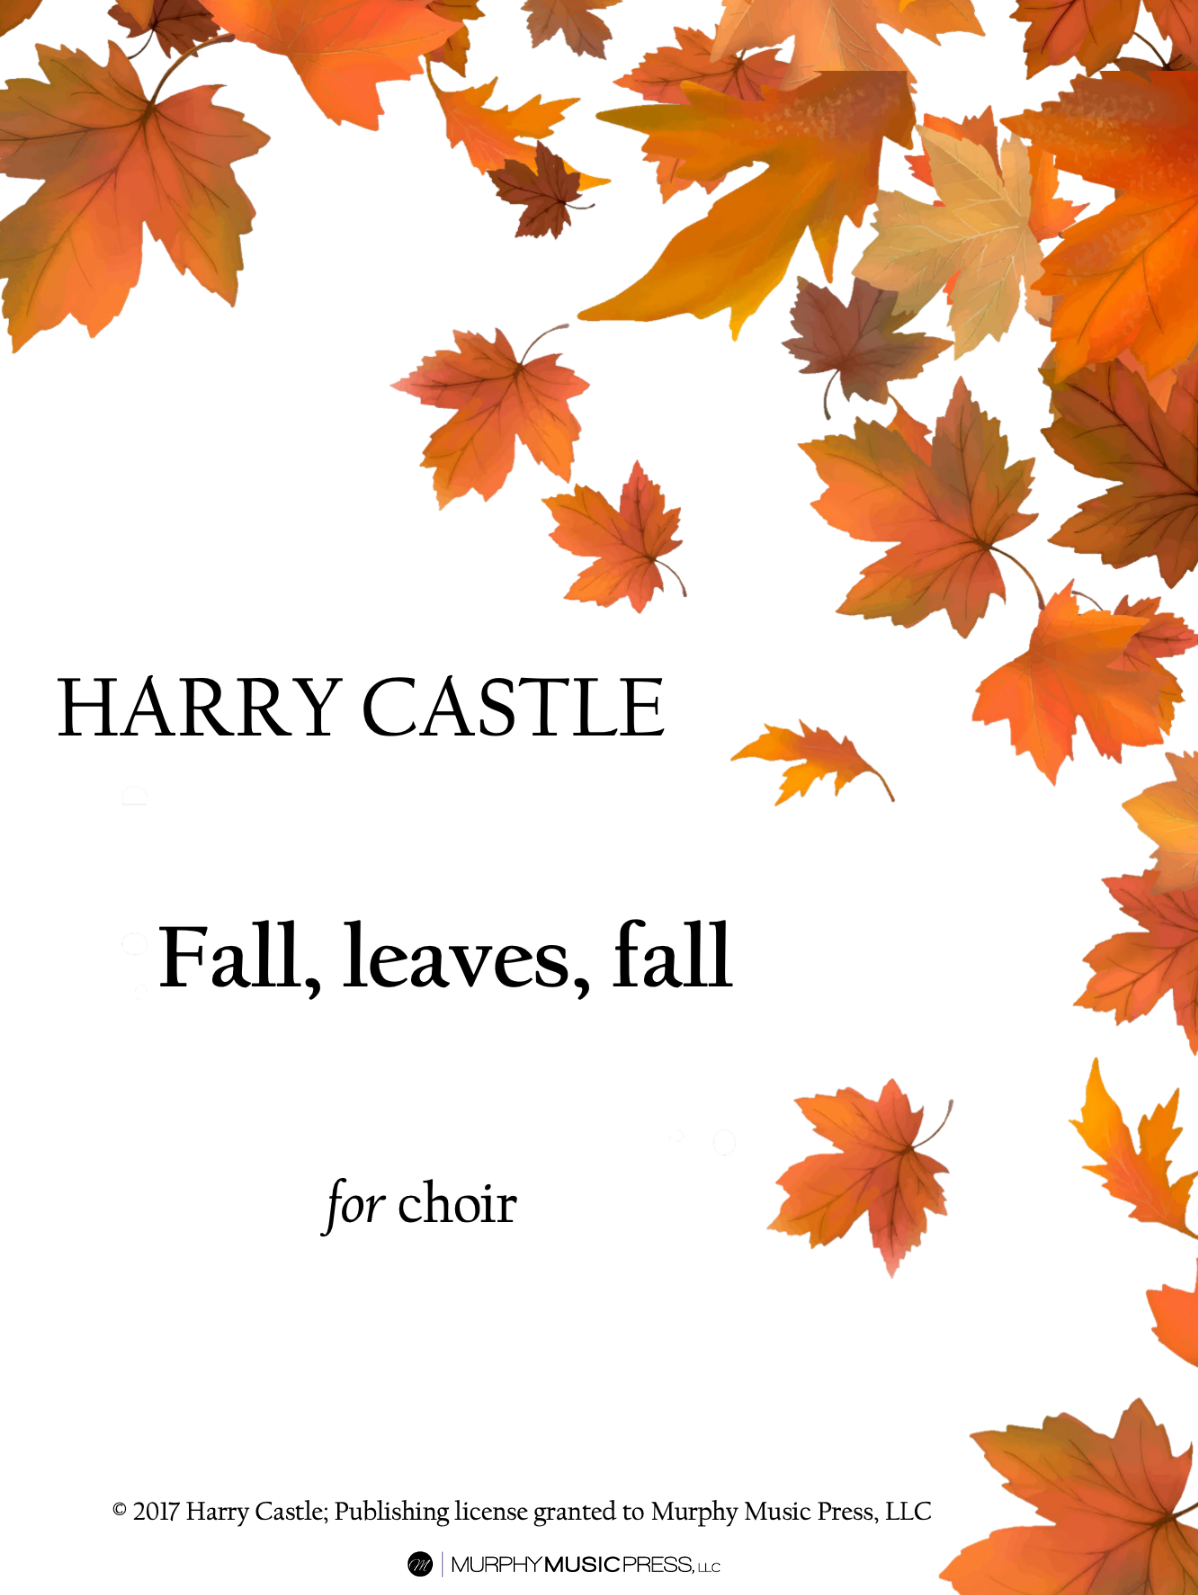 Fall, leaves, fall by Harry Castle